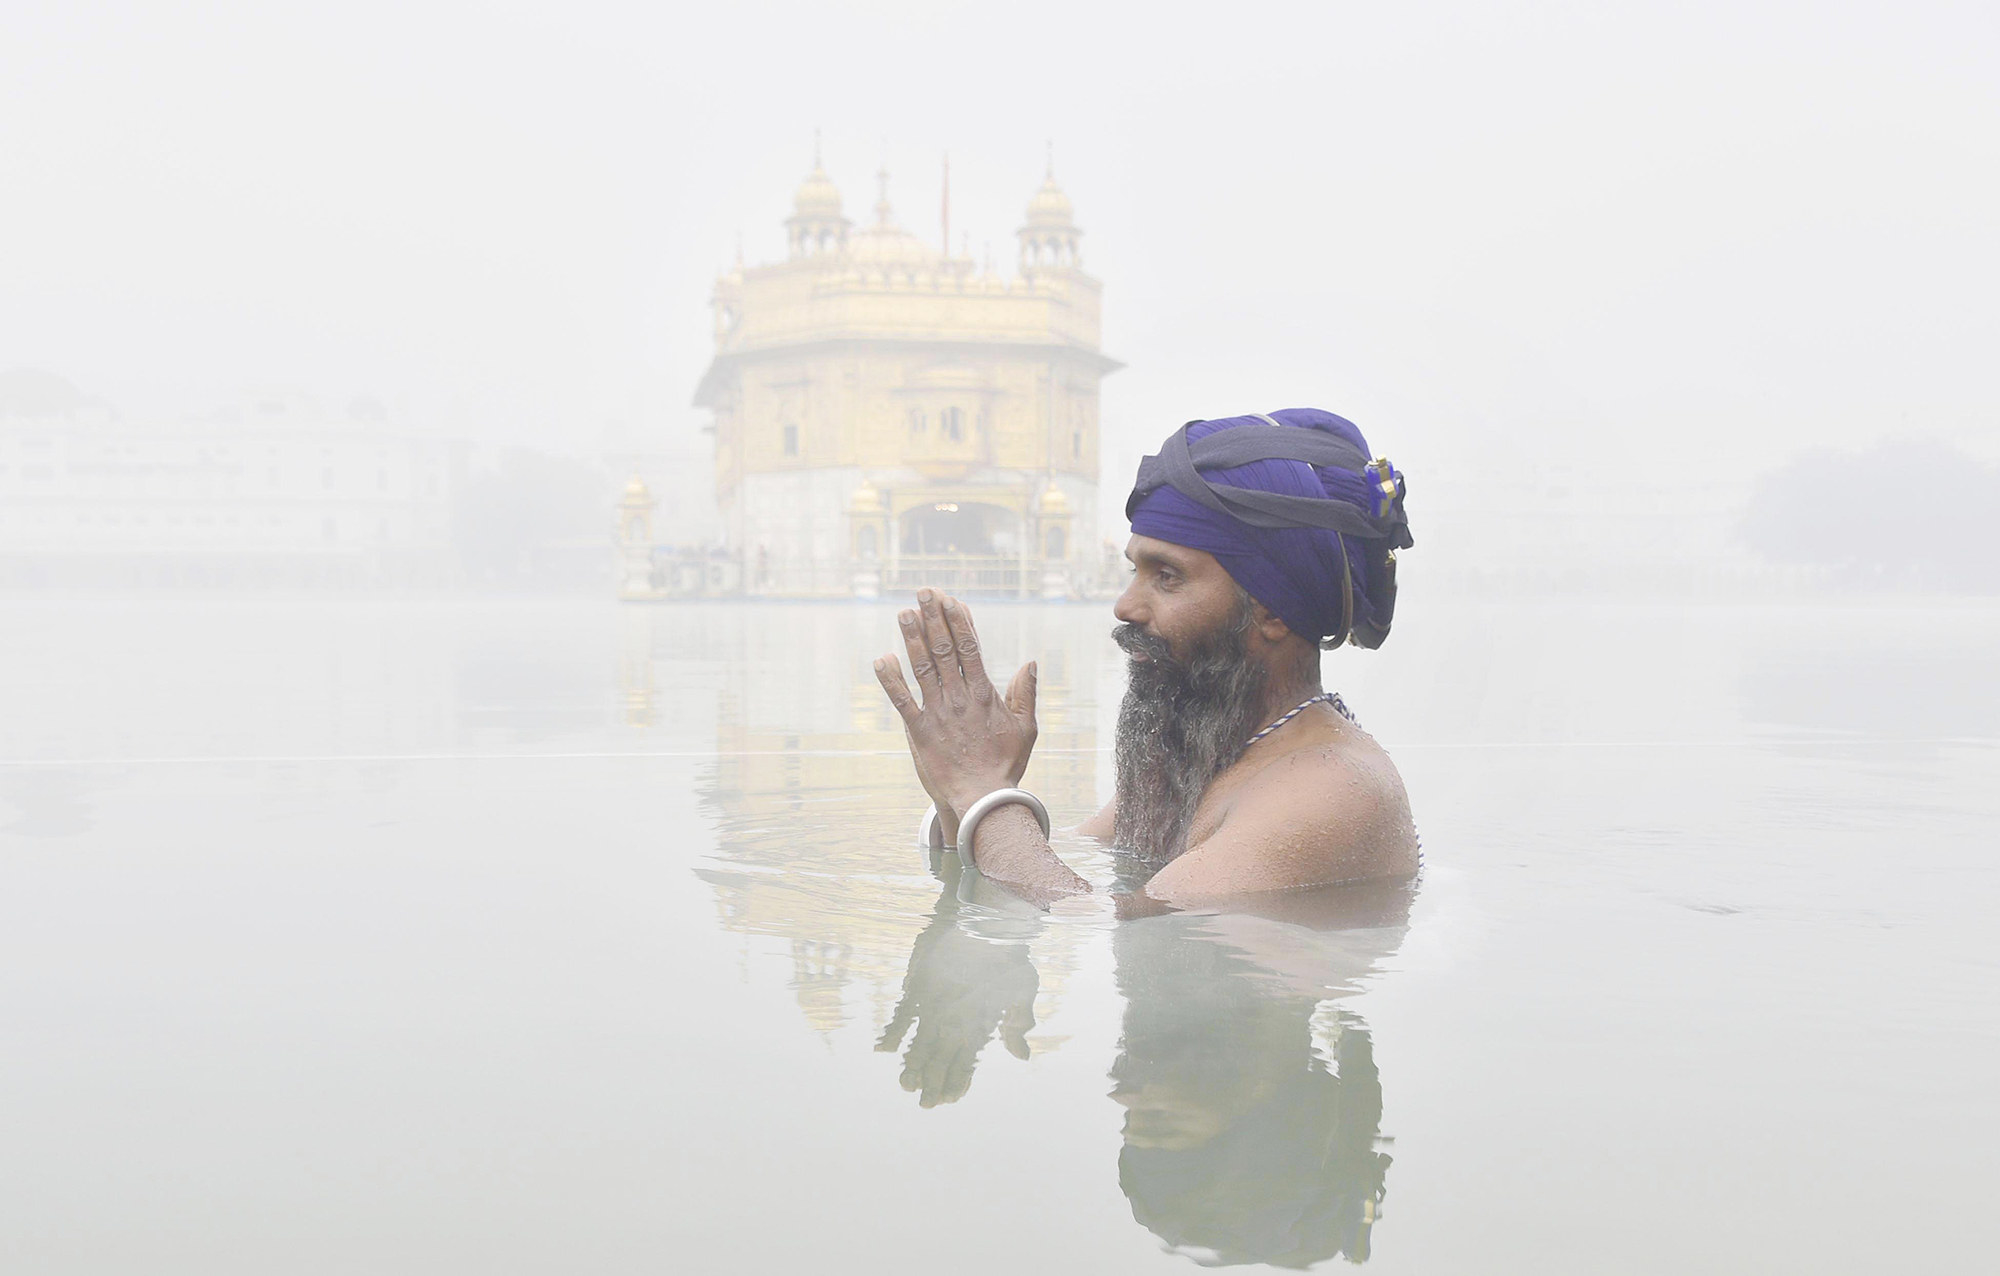 A person with a purple turban stands in chest-deep water in front of the Golden Temple